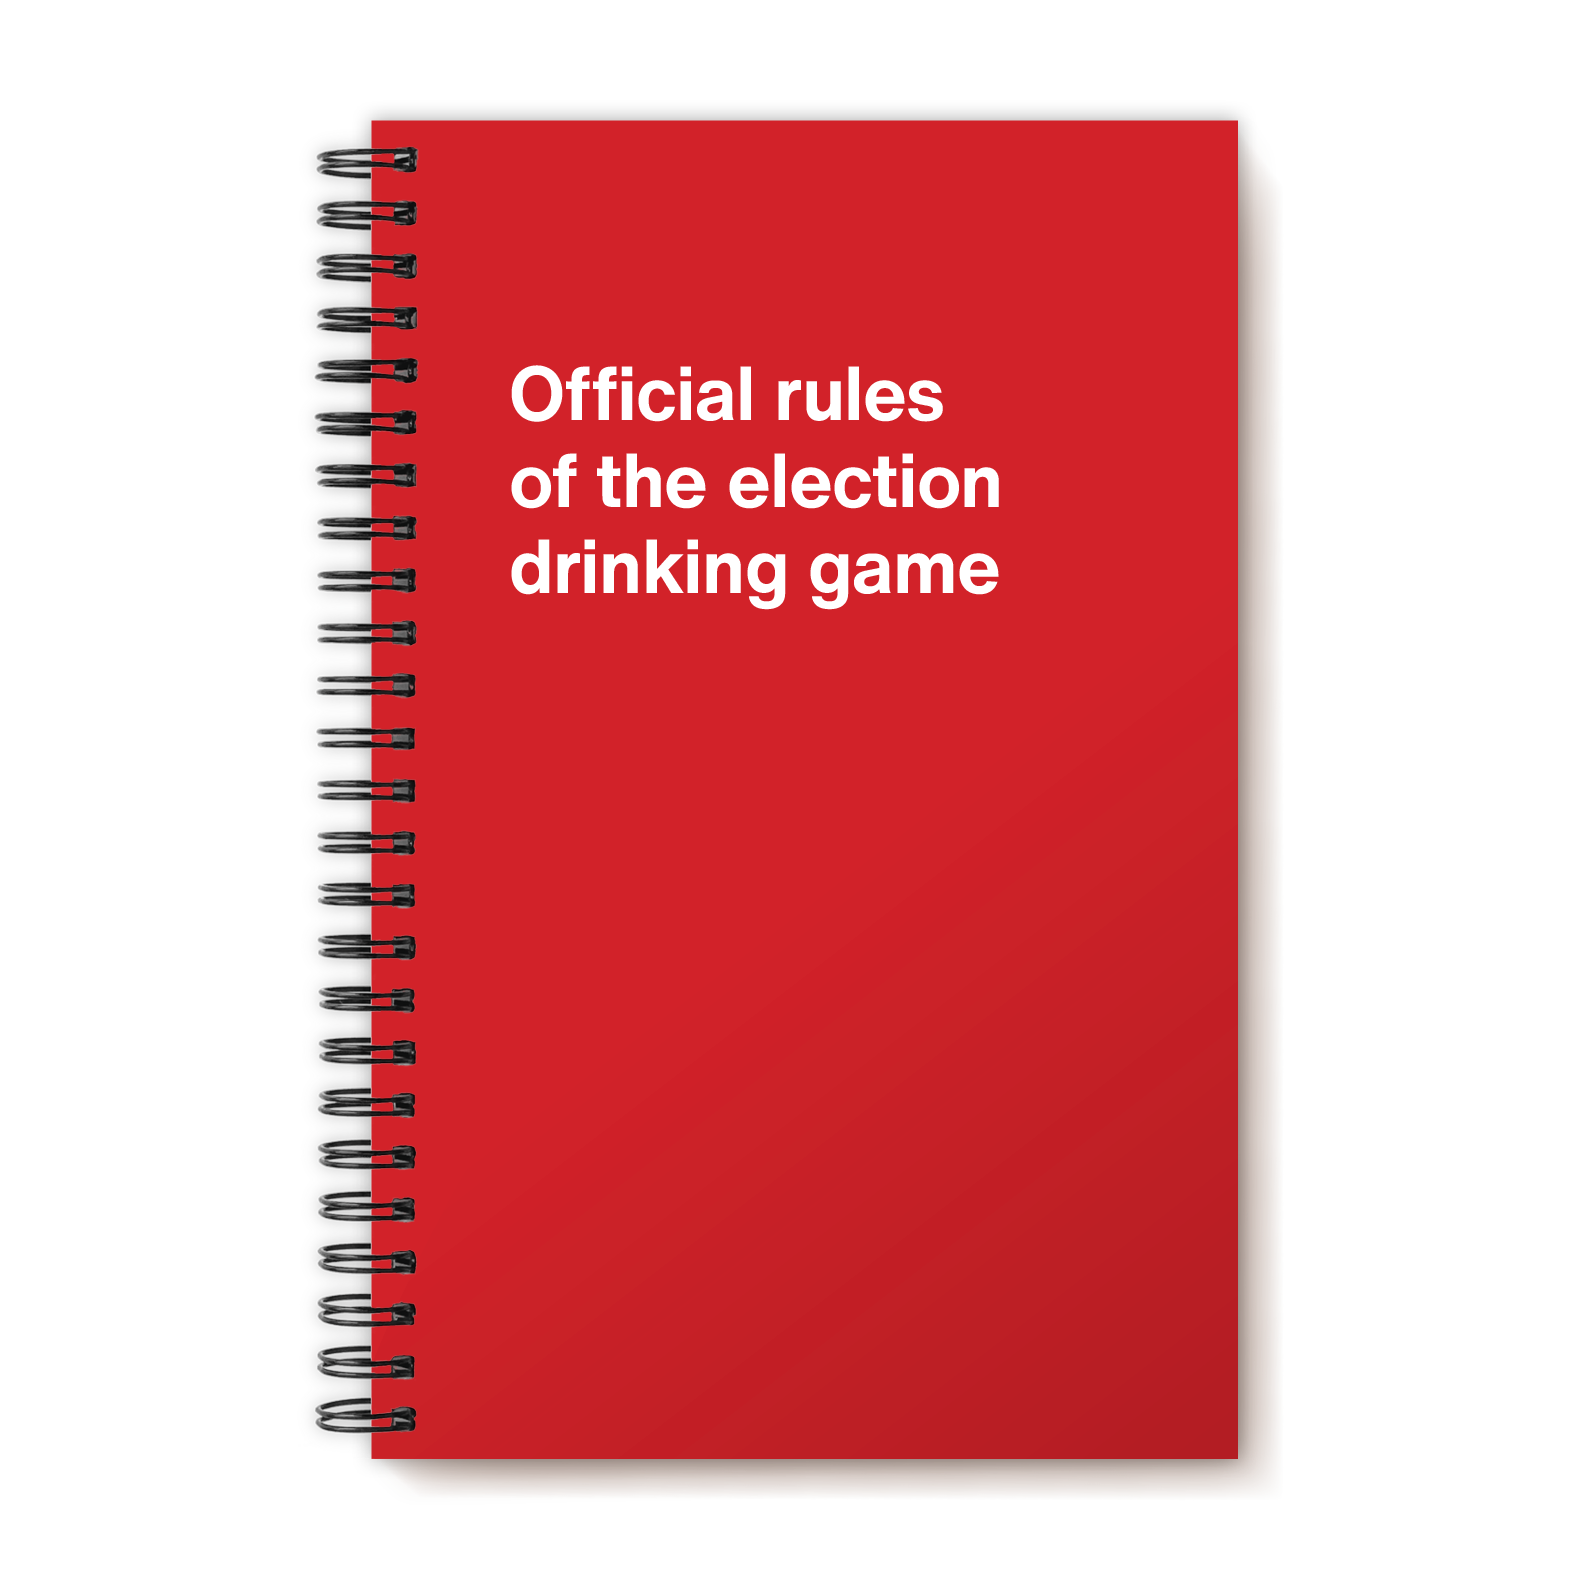 Official rules of the election drinking game